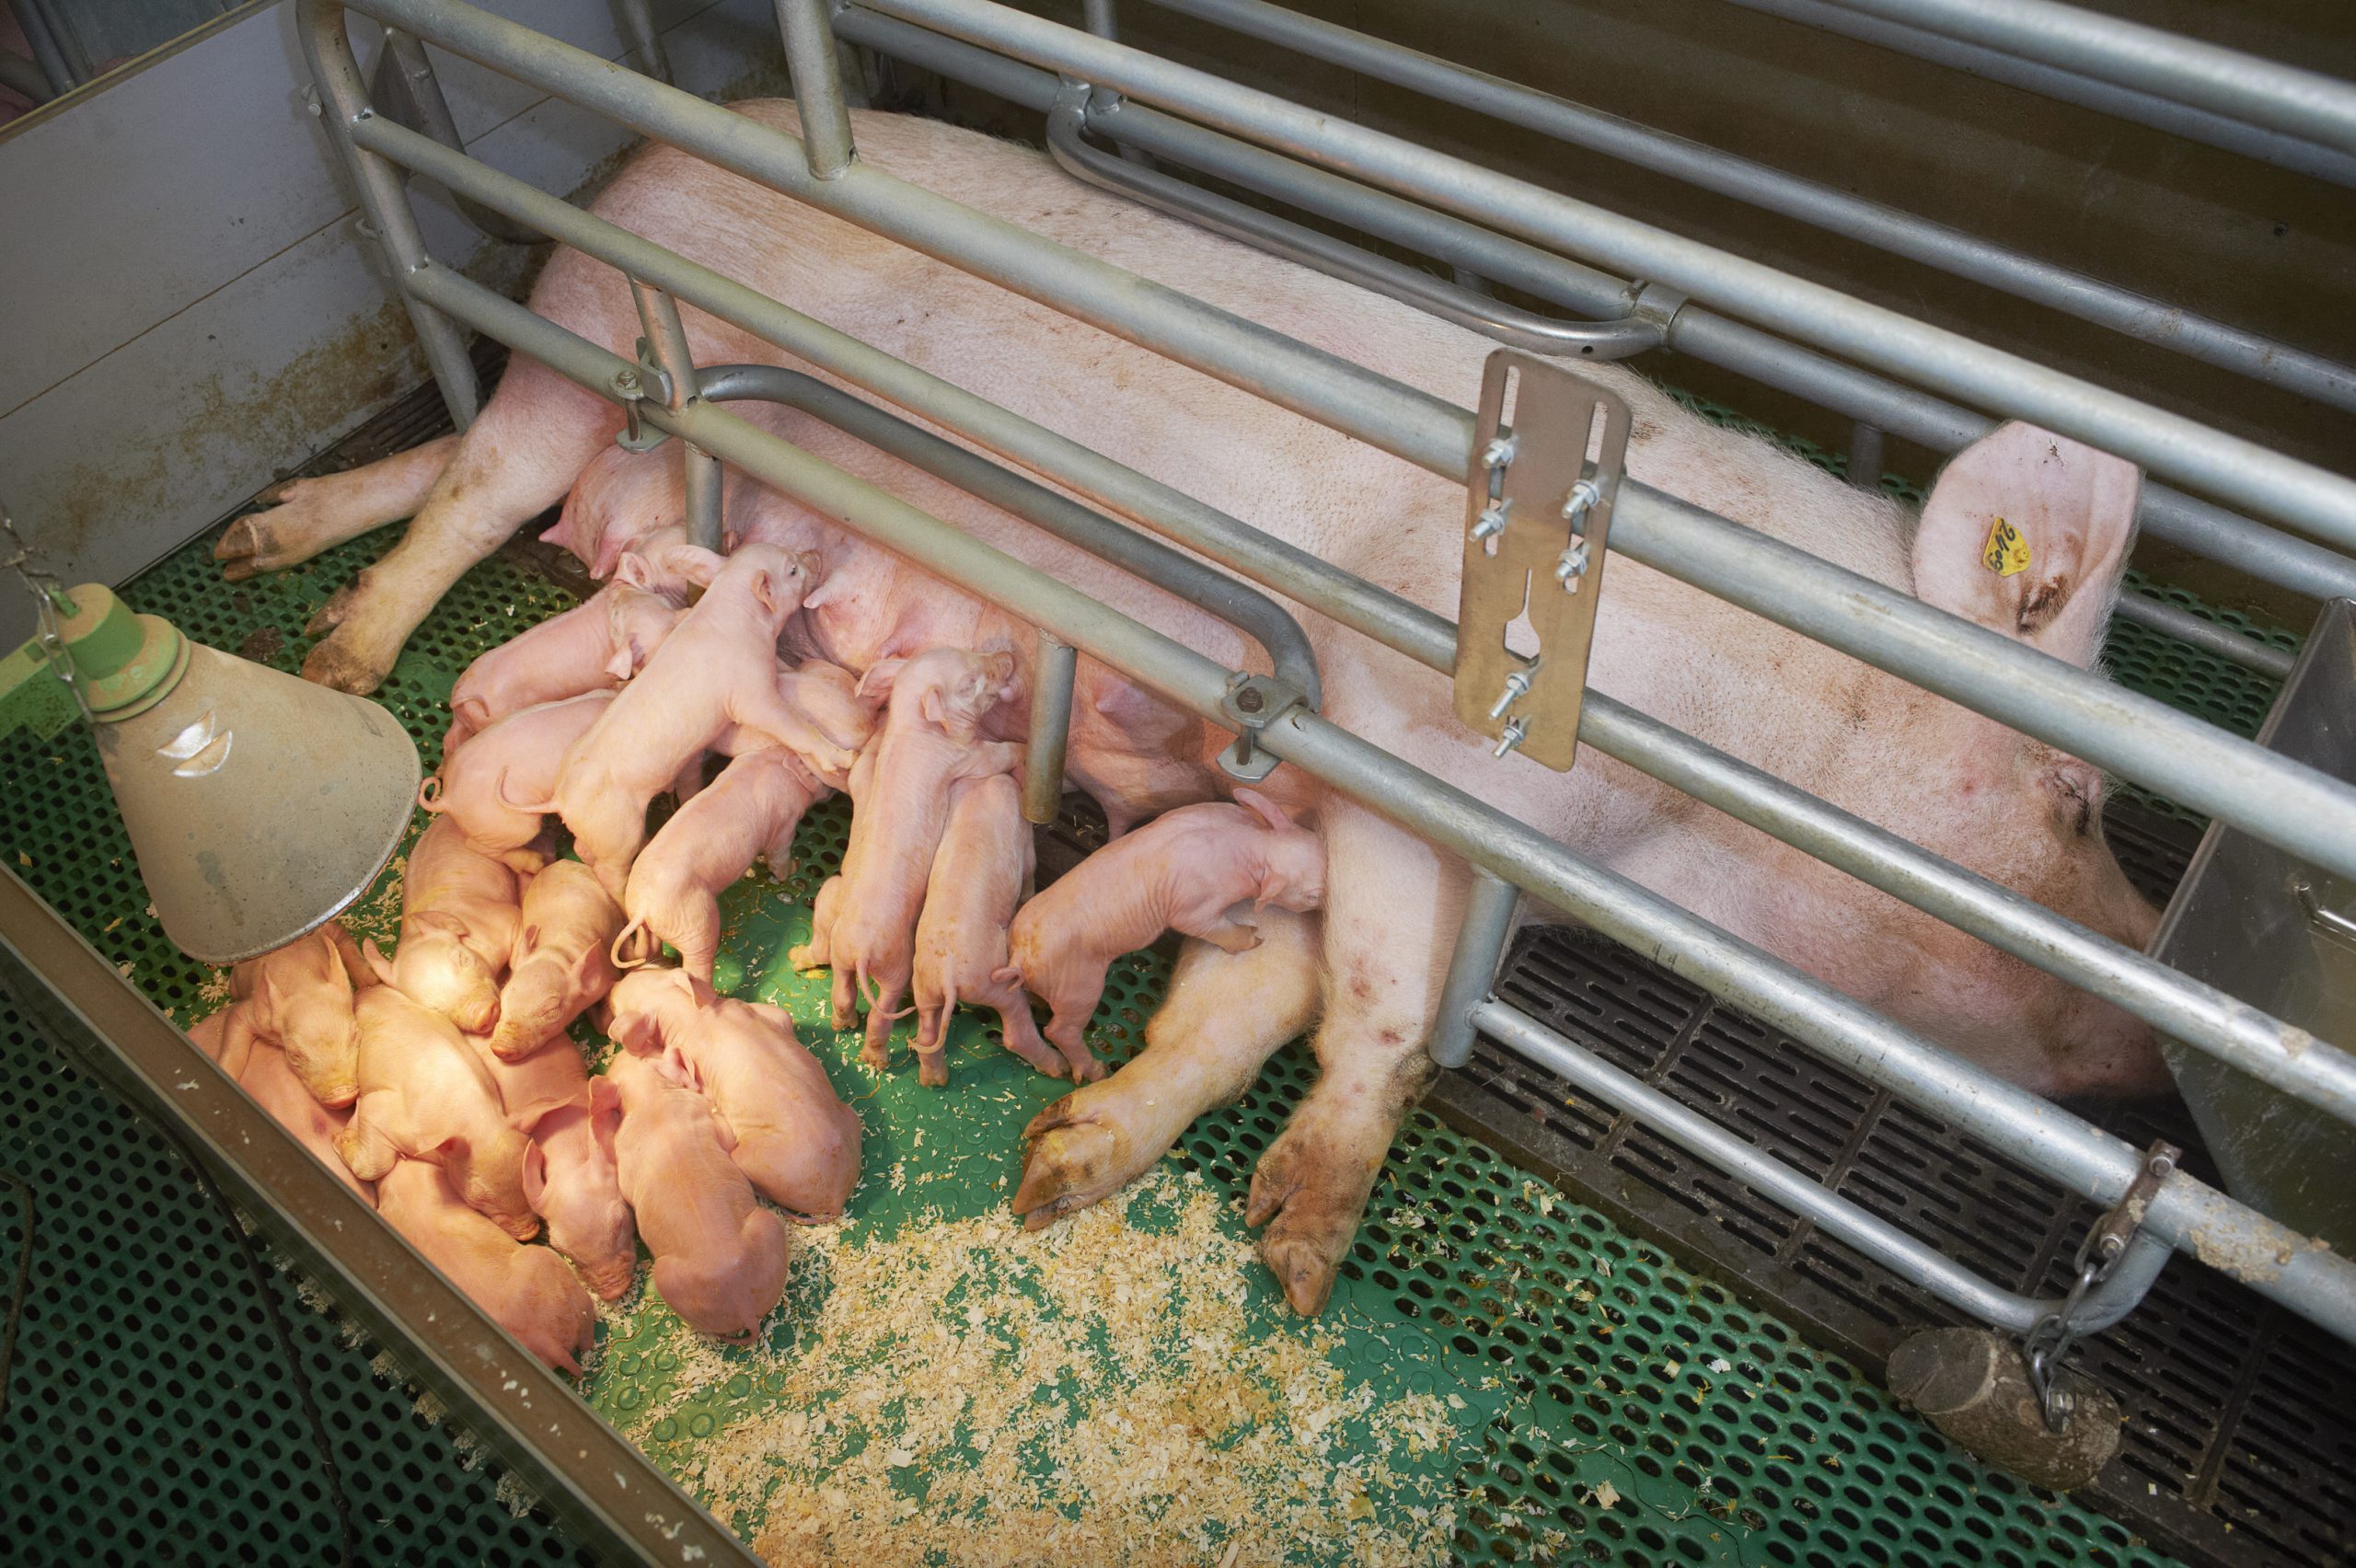 Sows with claw problems will give birth to fewer litters before culling and the litters are smaller with fewer live born piglets. Van Assendelft Fotografie